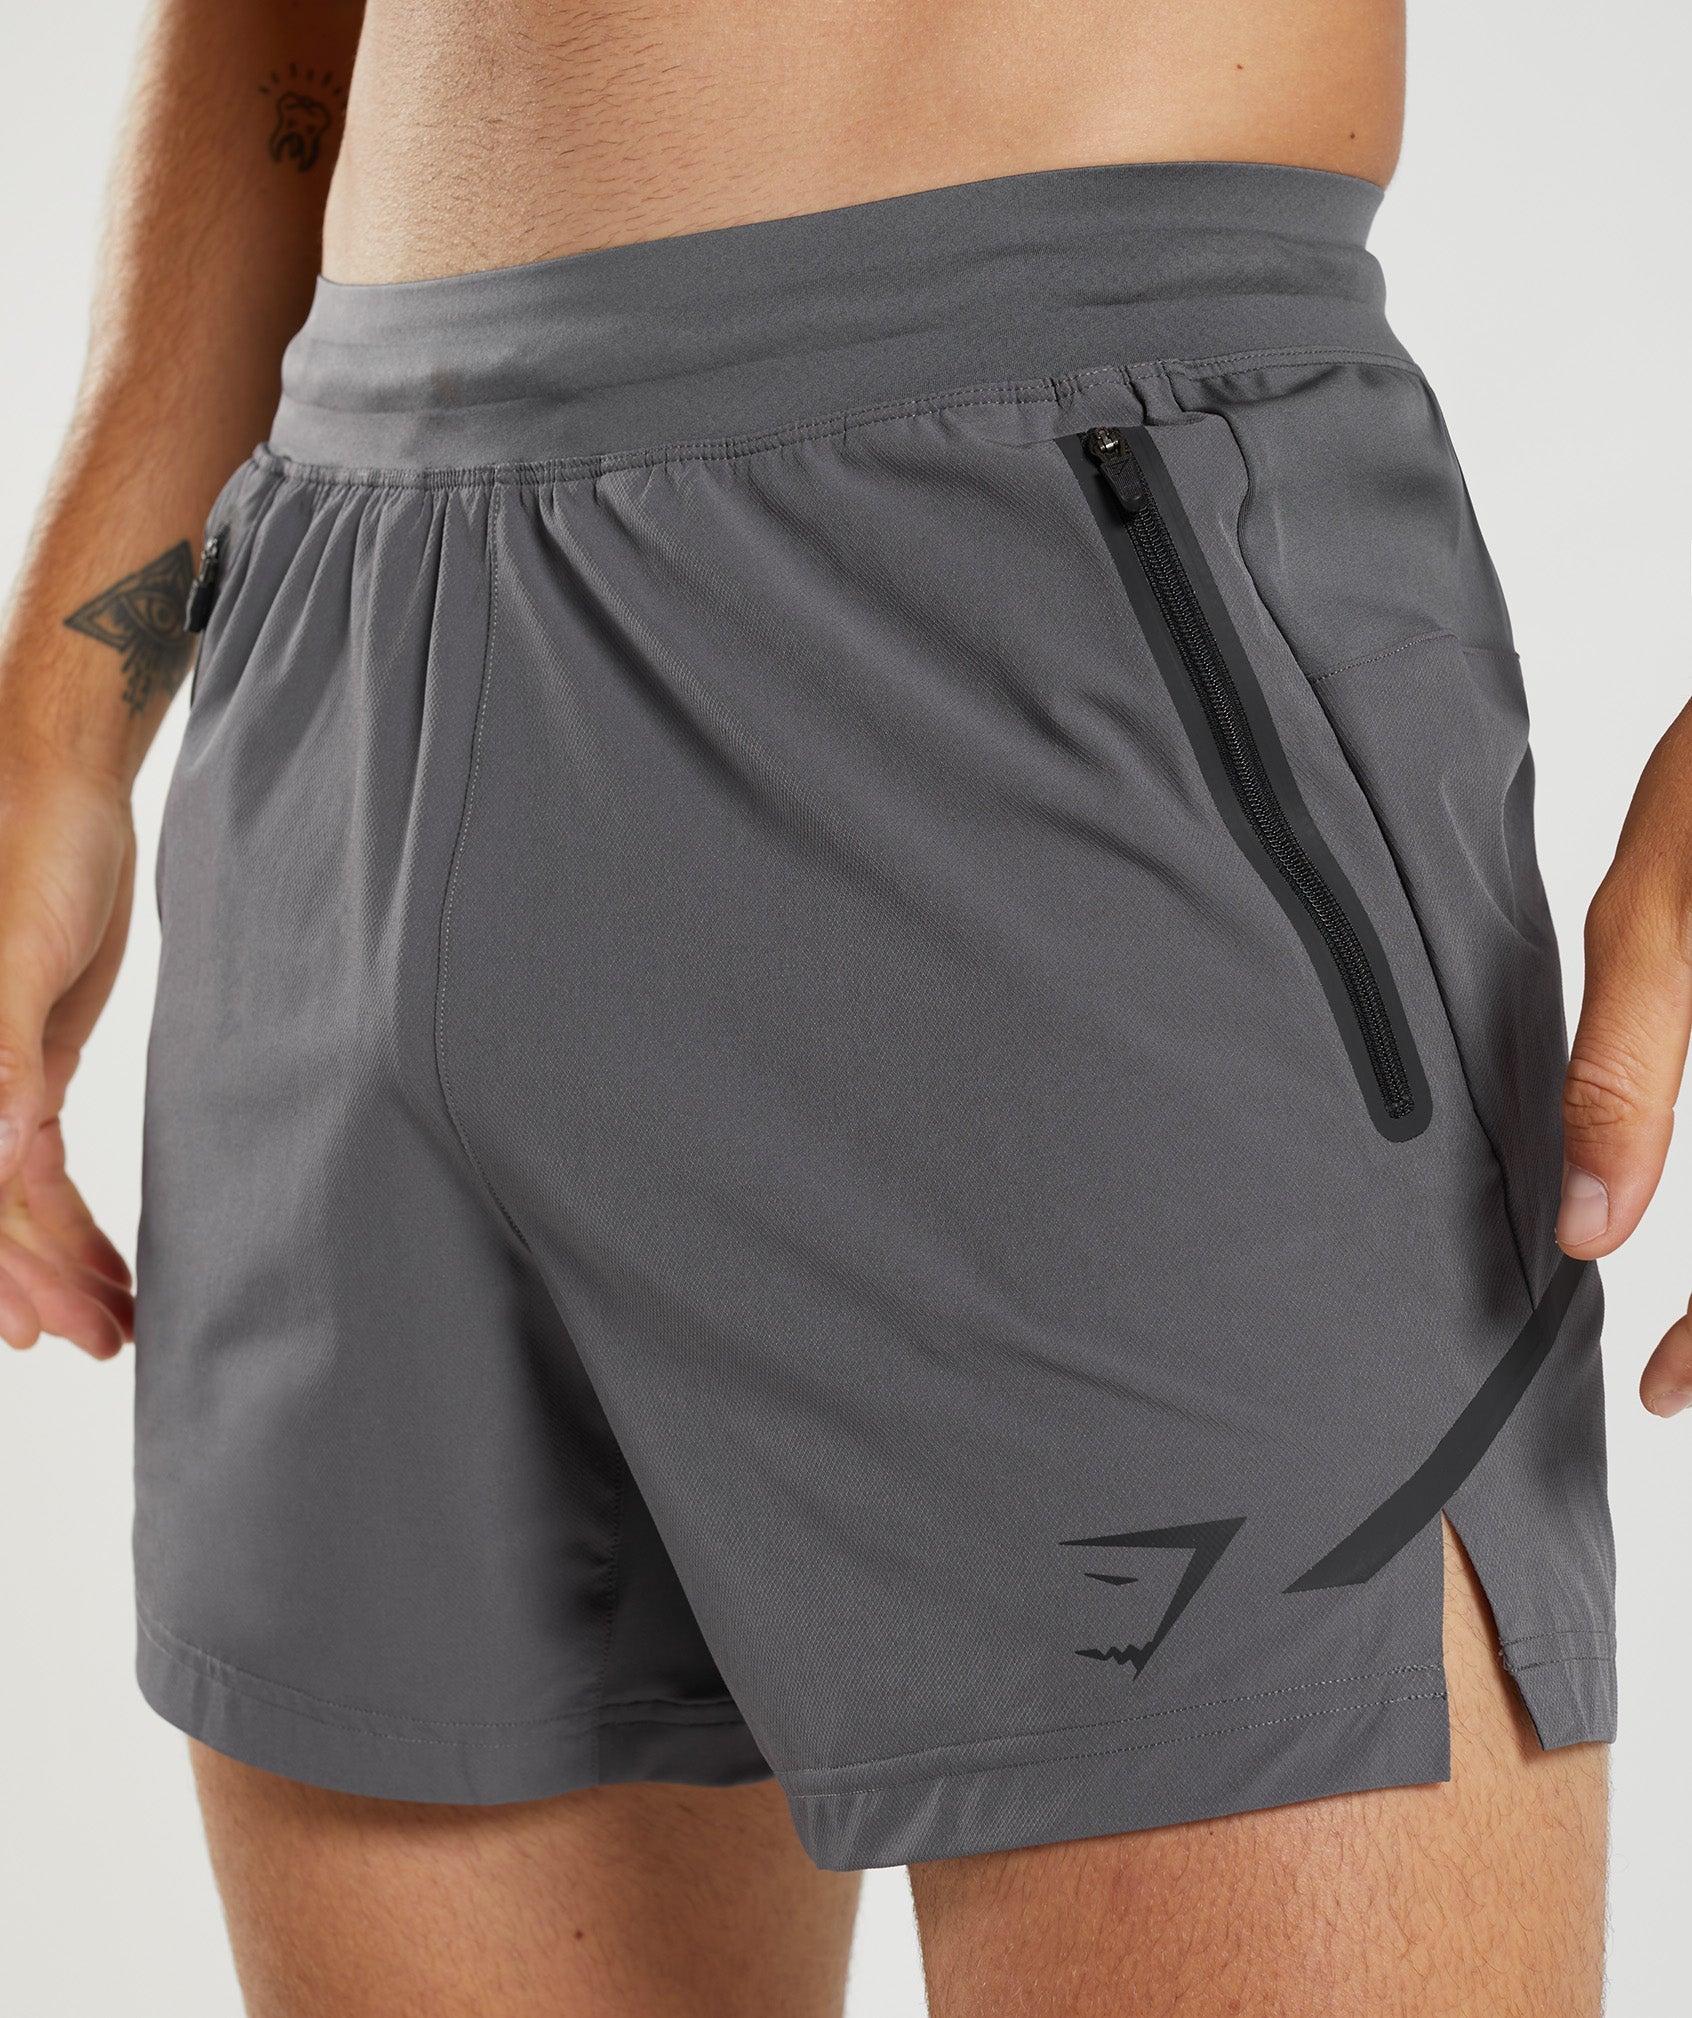 Apex 5" Perform Shorts in Silhouette Grey